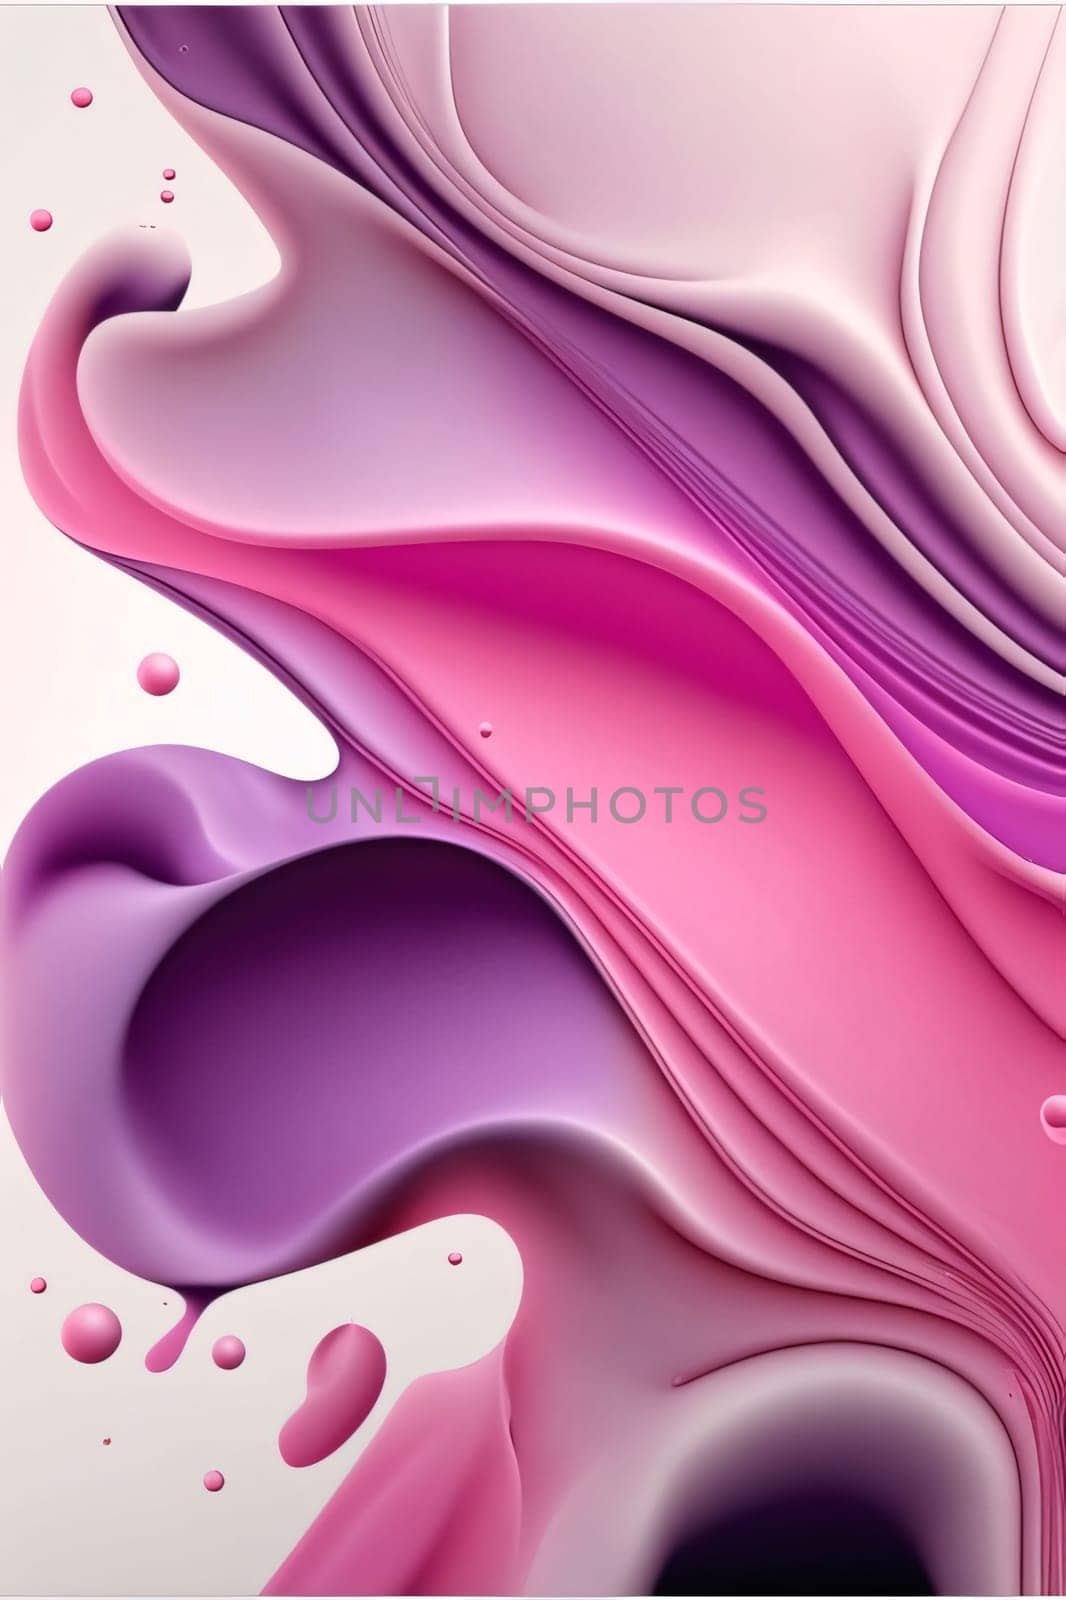 Abstract background design: Abstract background with pink and purple flowing liquid shapes. Vector illustration.